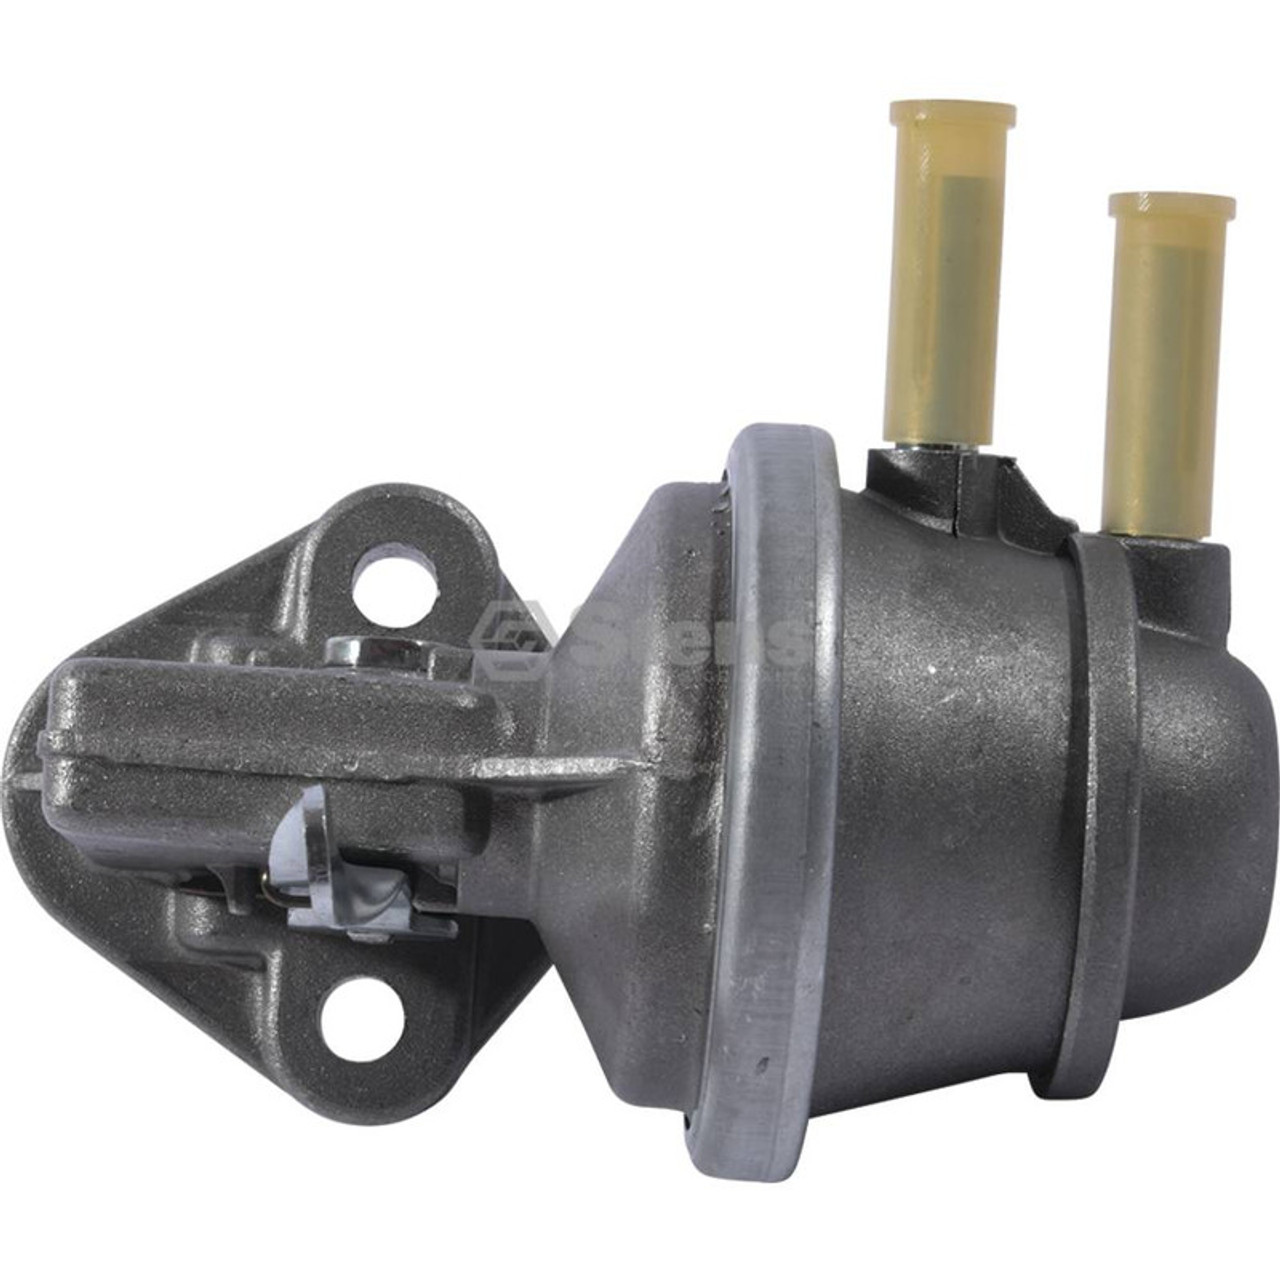 Fuel Pump for John Deere 1032, 1042, 1052, 1133, 1144, 1155, 1157, 1158, 1165, 1166, 1169, 1174, 1175, 1175H, 1177, 482C, 70, 8875, 1350, 1445F, 1550, 1745F, 1750, 1750V, 1845F, 1850, 1850F, 1850N, 1850V, 1950, 1950F, 1950N, 2155, 2250, 2250F, RE38009